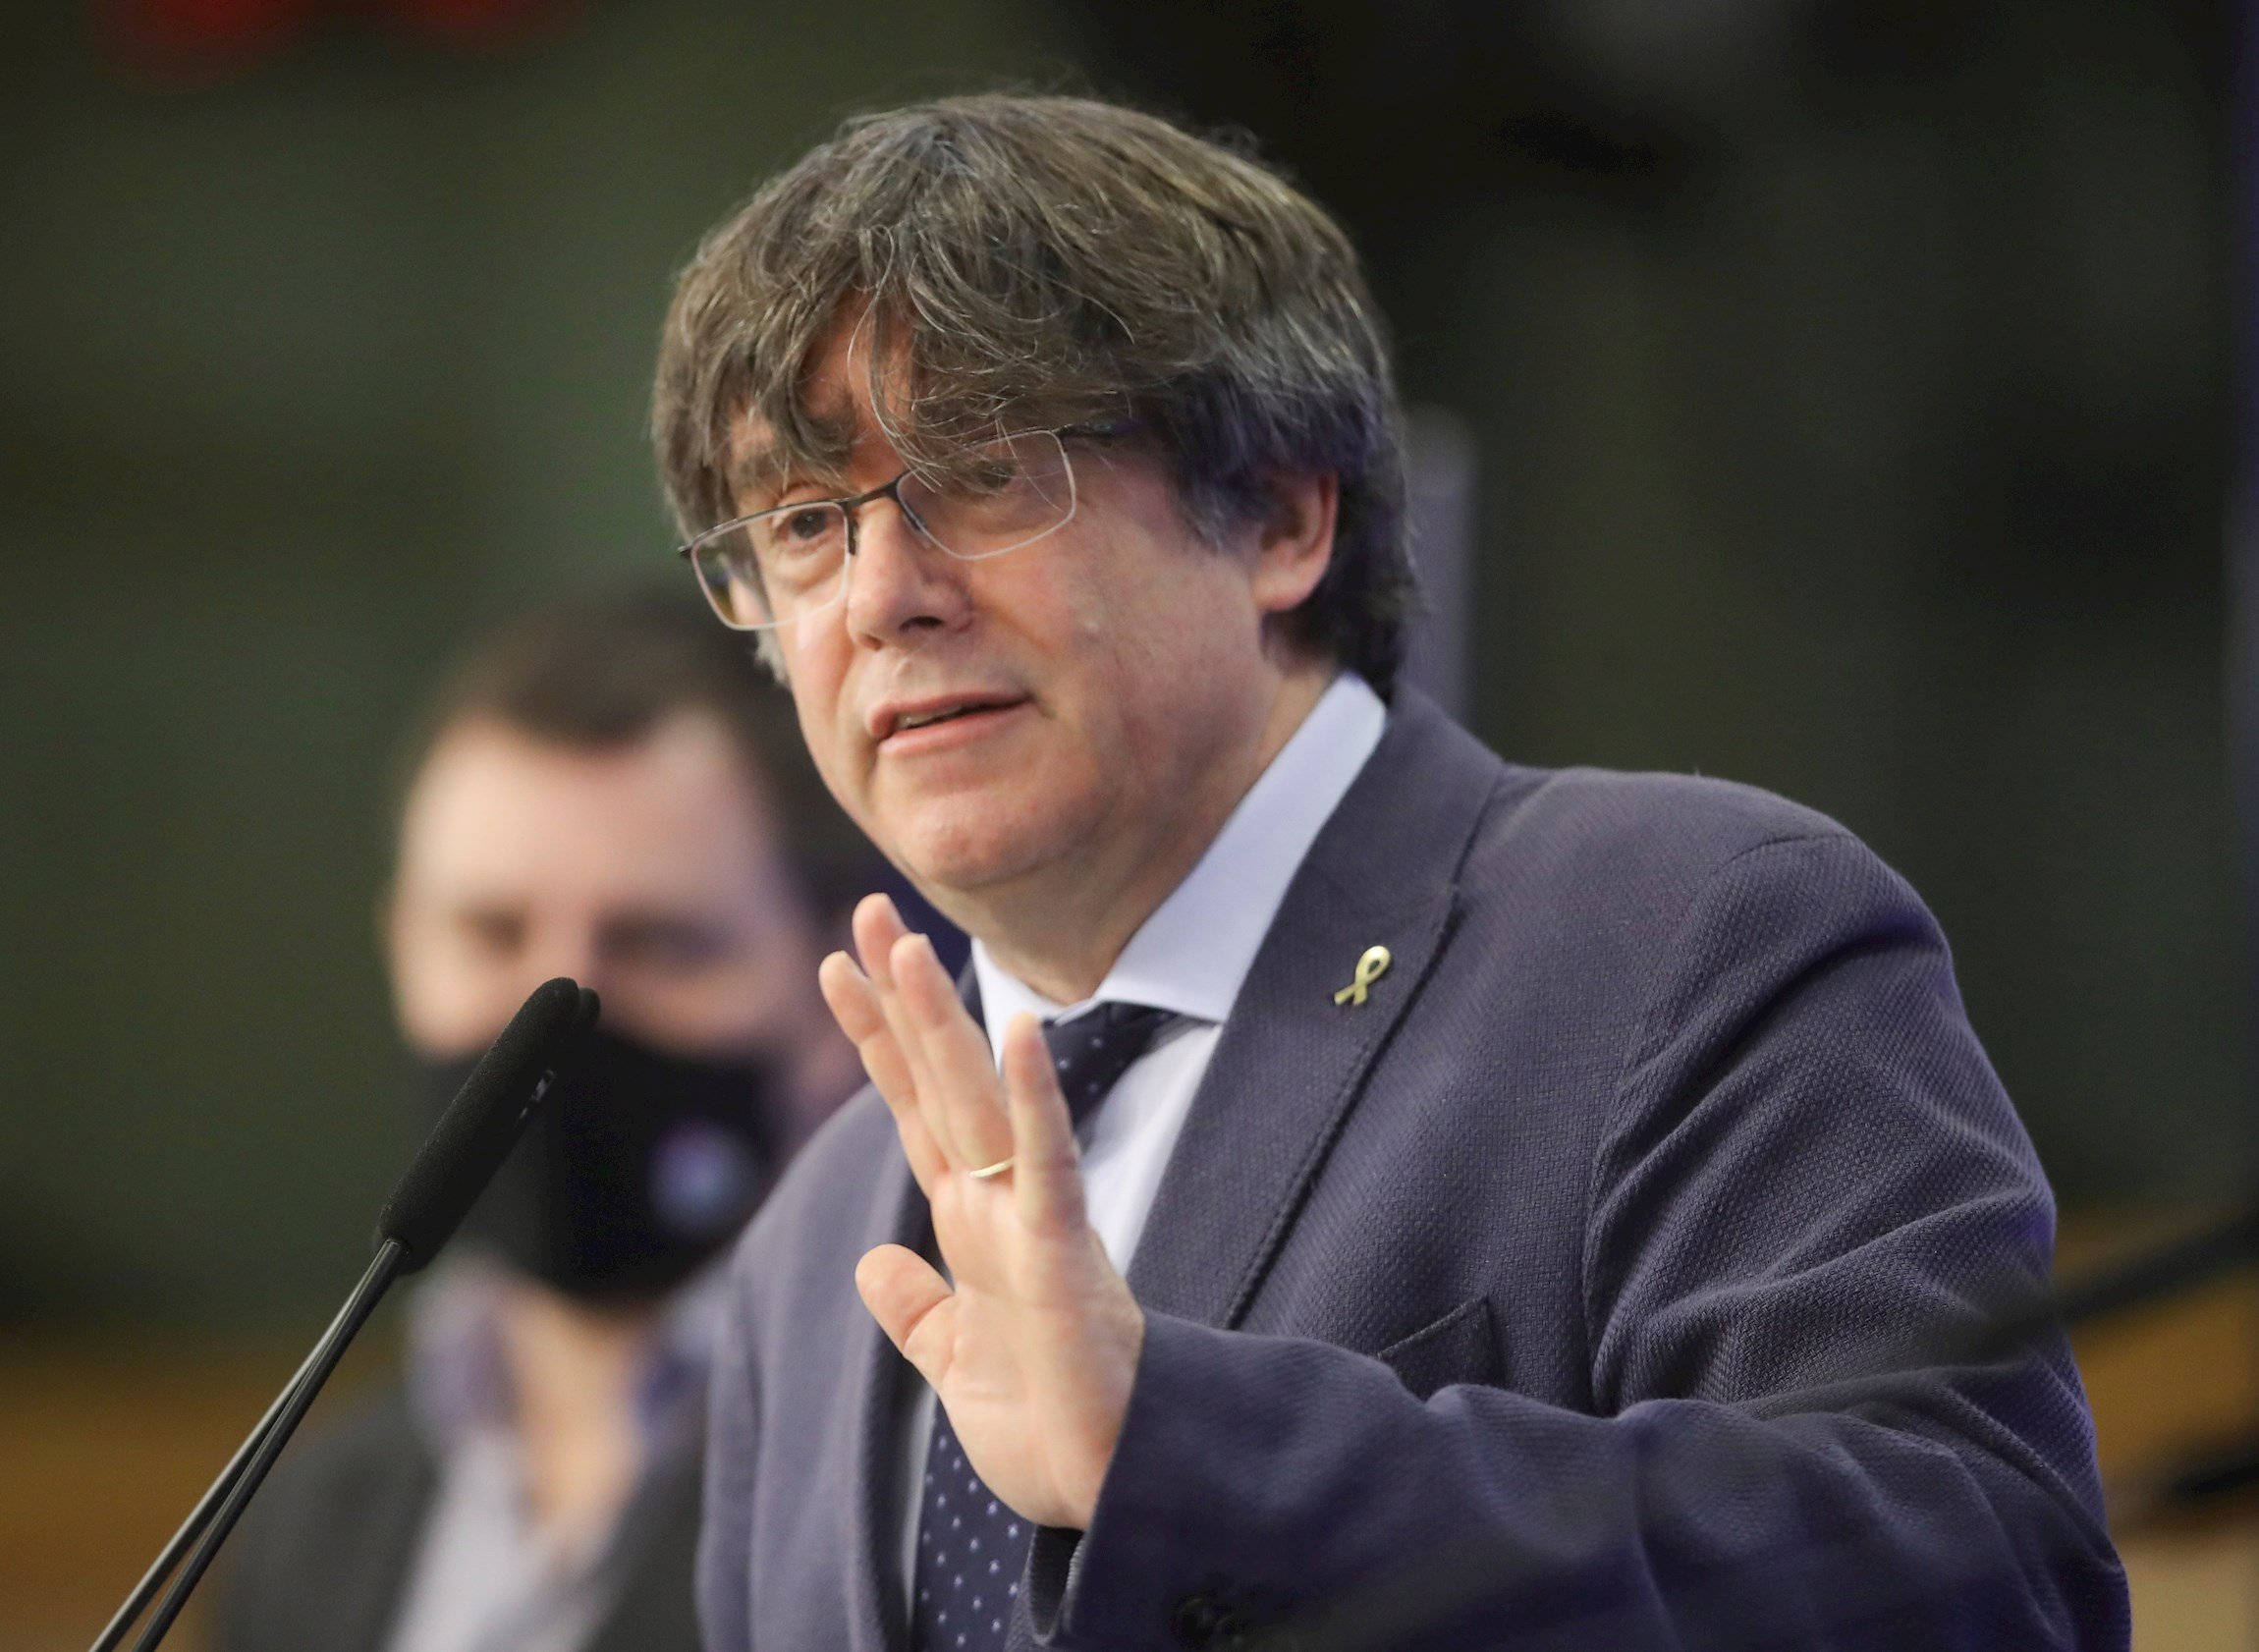 What assets could Spain's Court of Accounts confiscate from Carles Puigdemont?